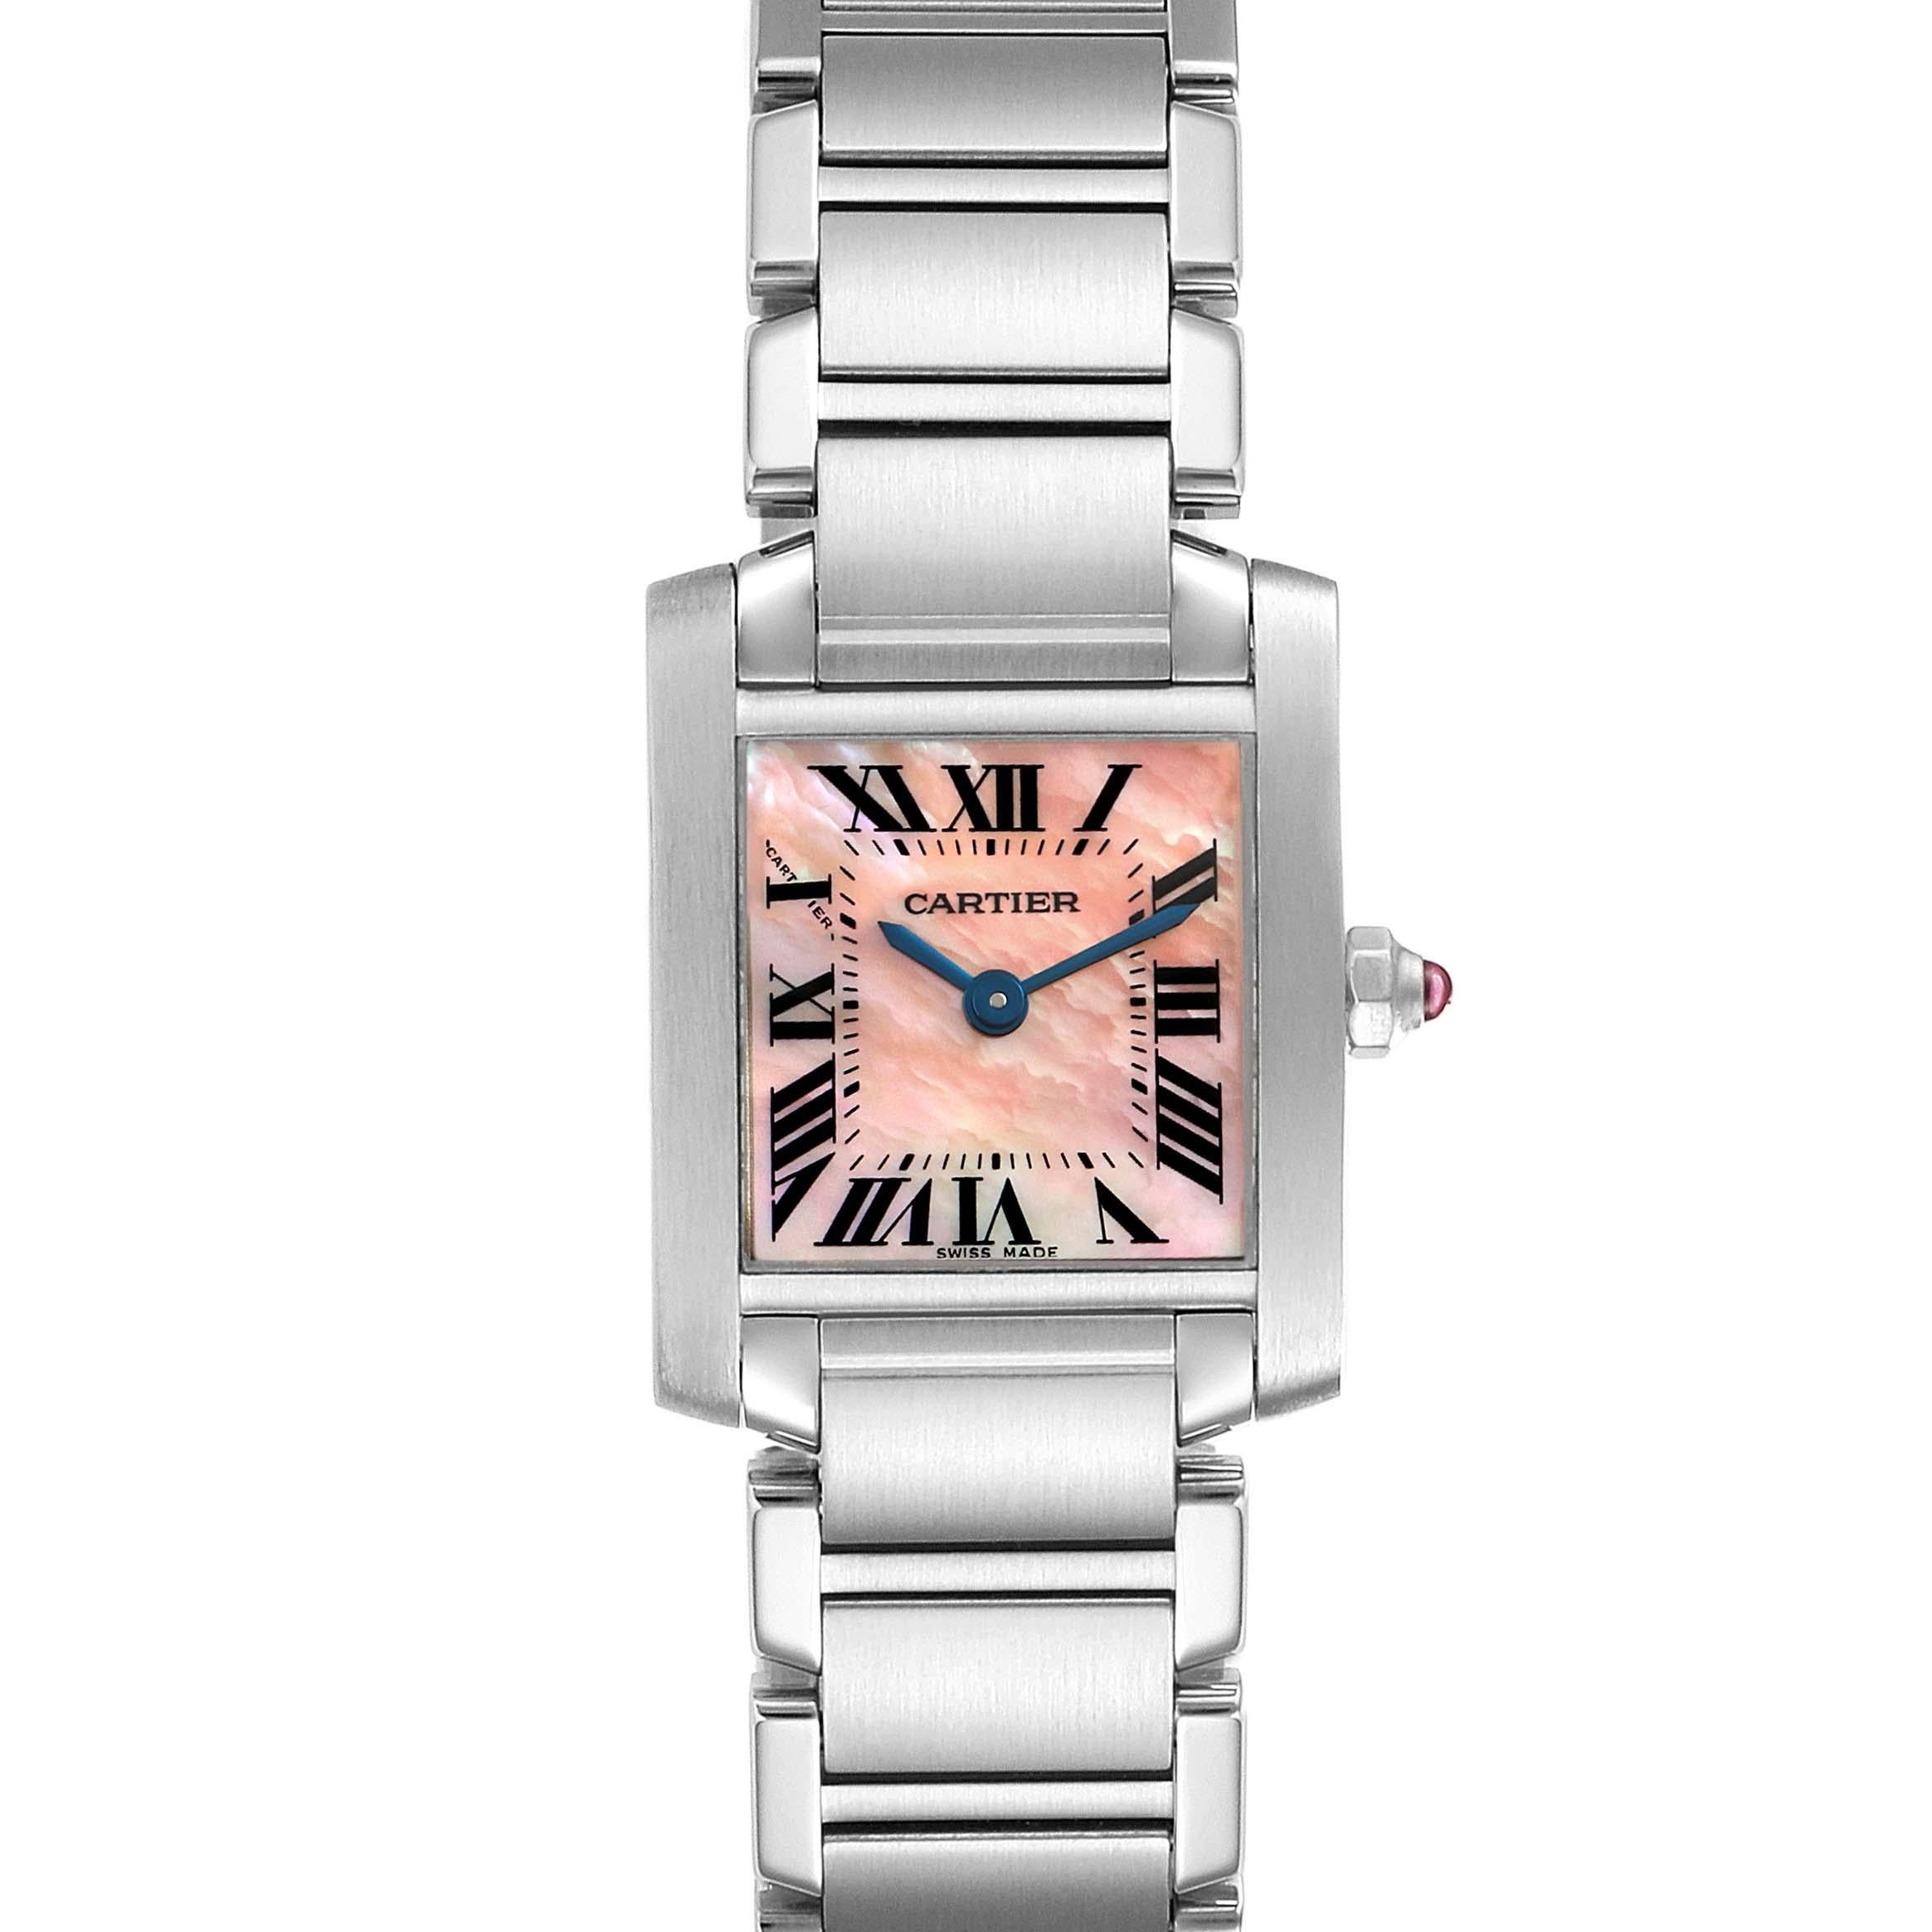 Cartier Tank Francaise Pink Mother of Pearl Steel Ladies Watch W51028Q3. Quartz movement. Rectangular stainless steel 20.0 x 25.0 mm case. Octagonal crown set with a pink sapphire cabochon. . Scratch resistant sapphire crystal. Pink Mother of pearl